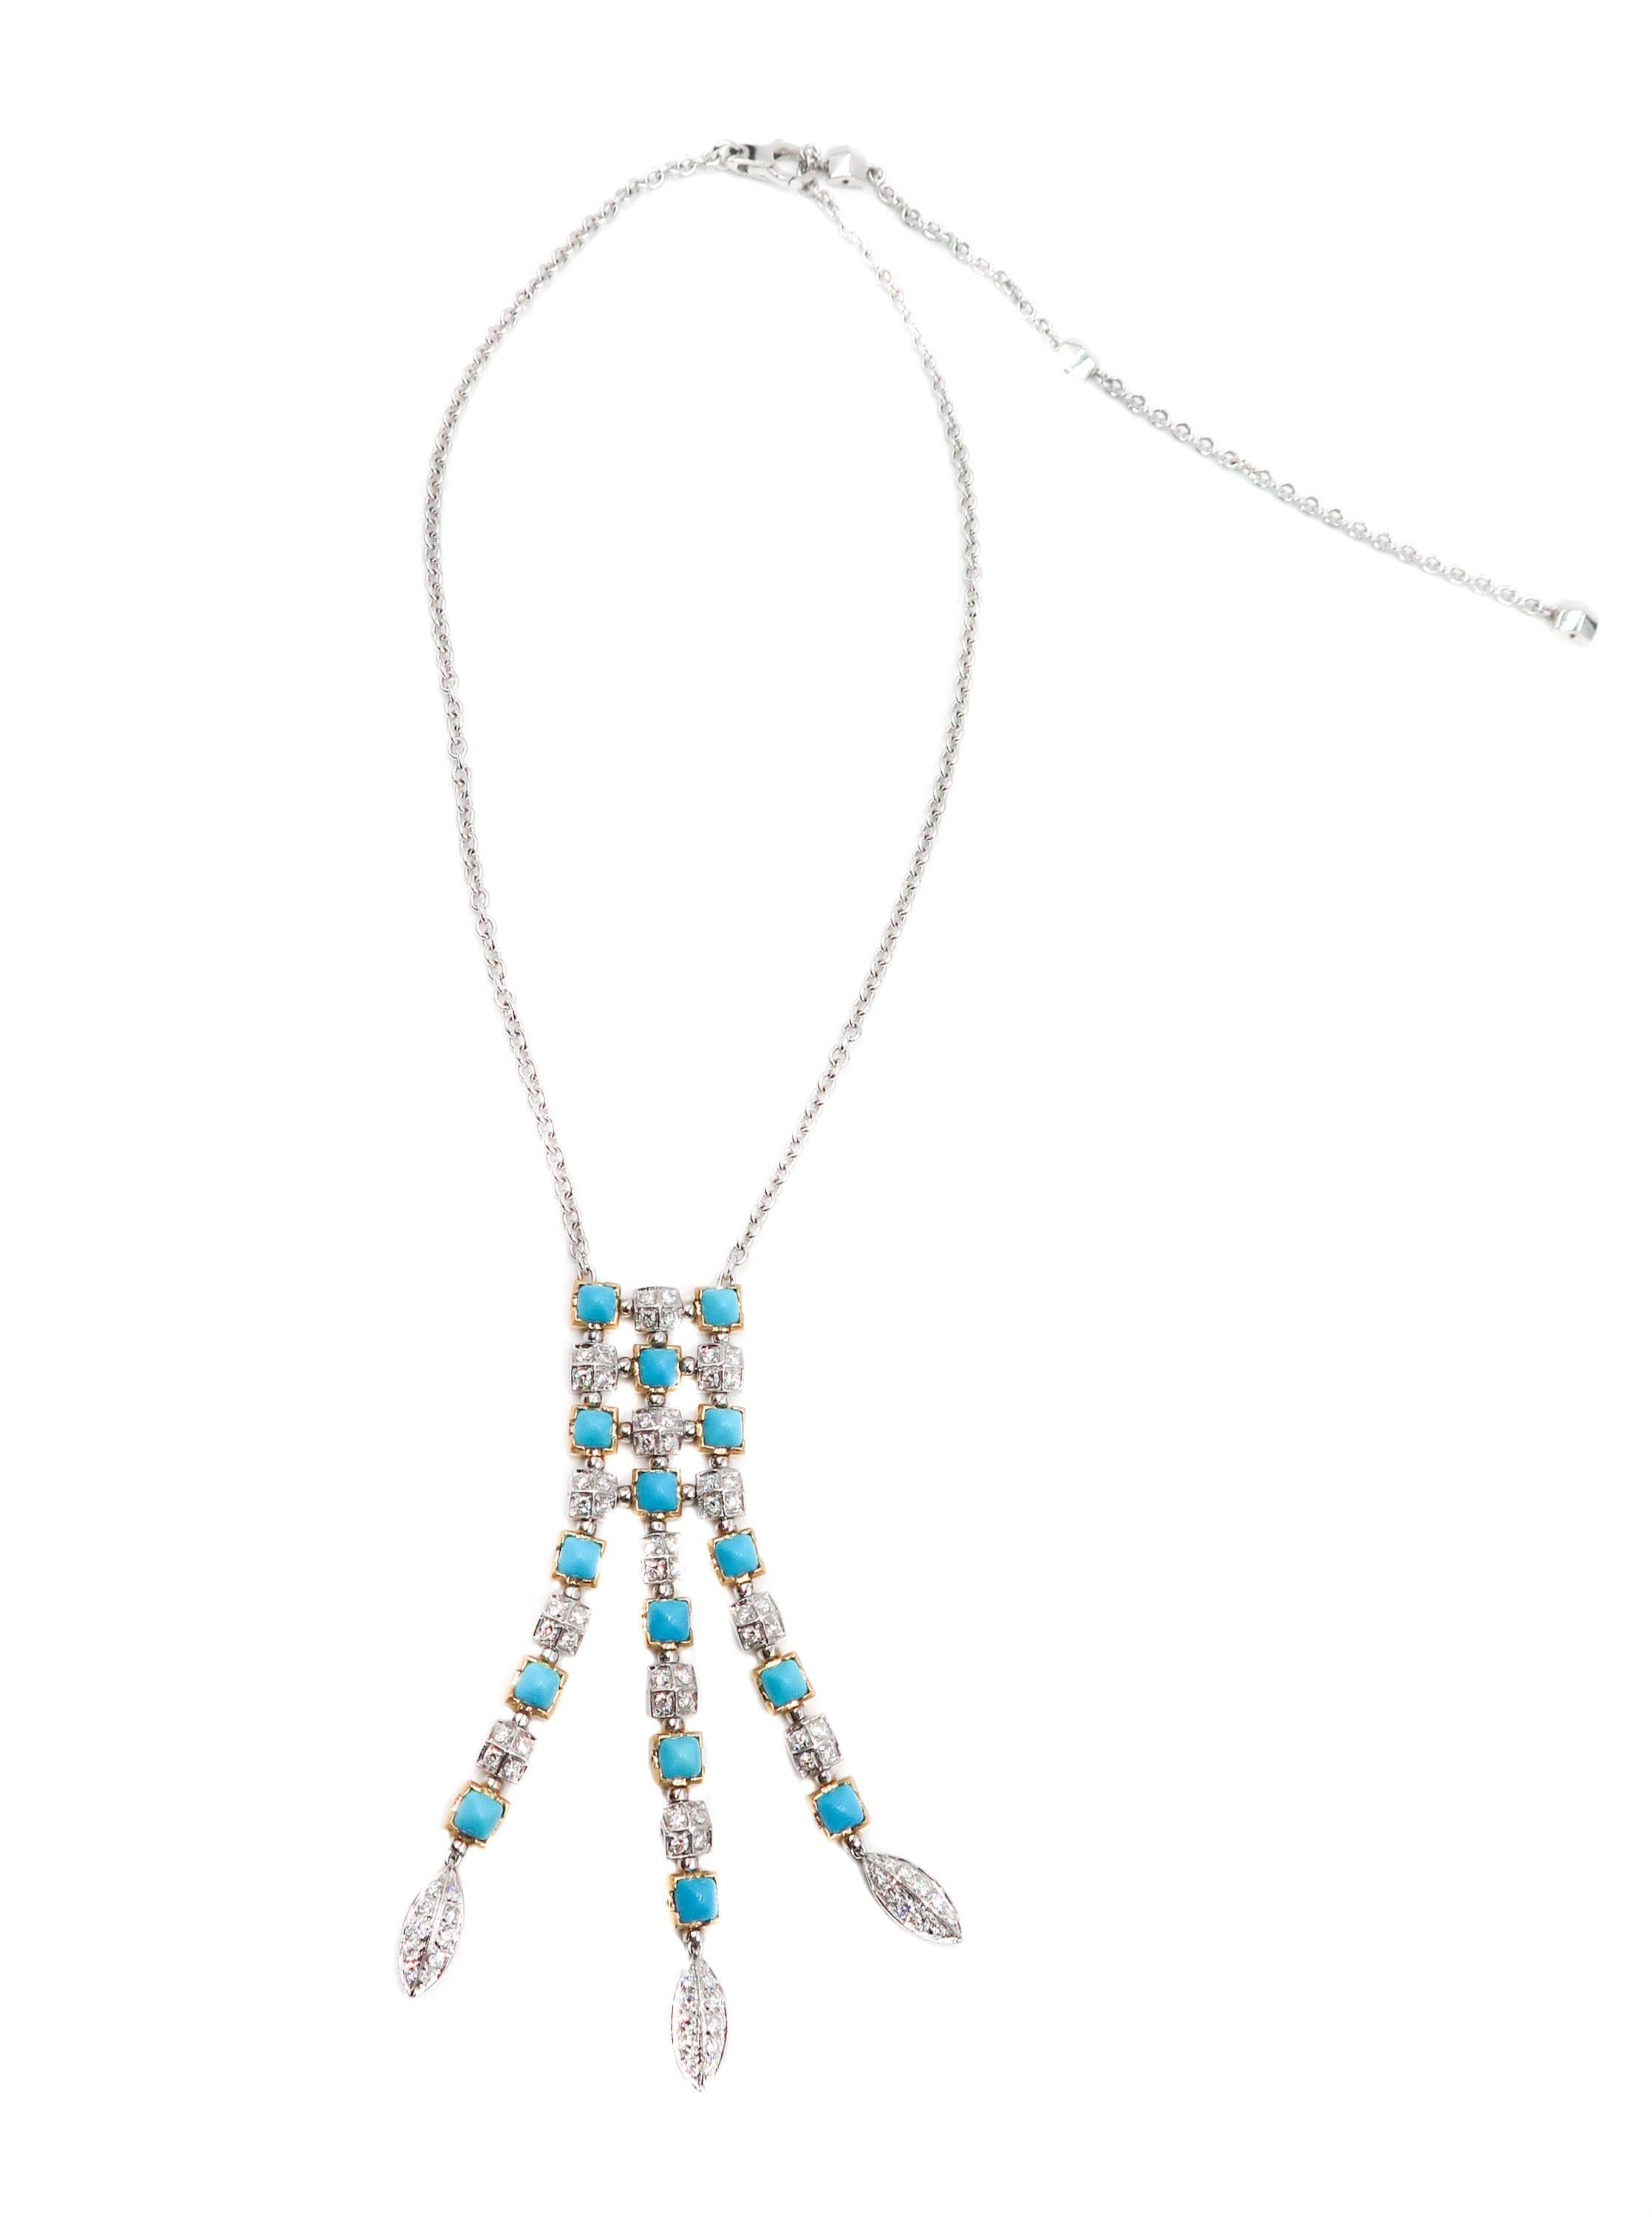 Contemporary Turquoise and Diamond White Gold Necklace